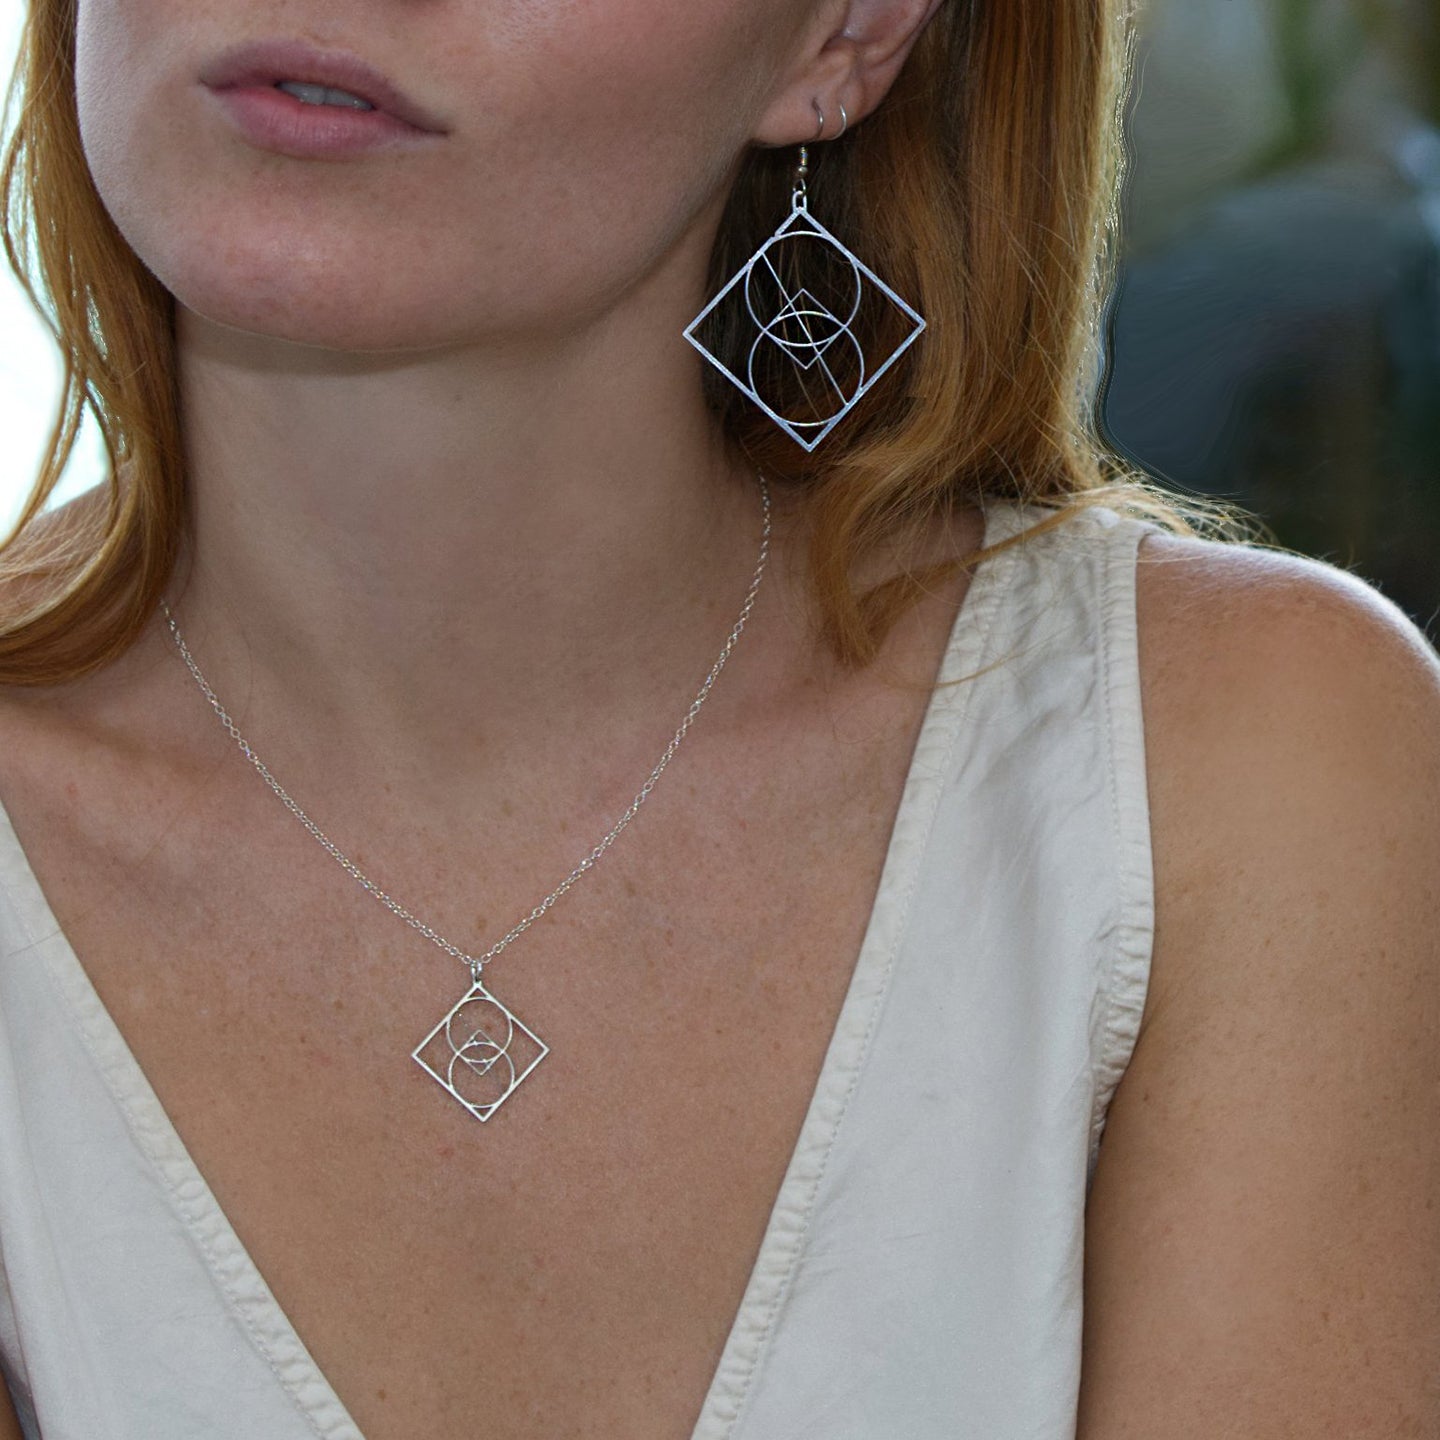 Synthesis Earrings